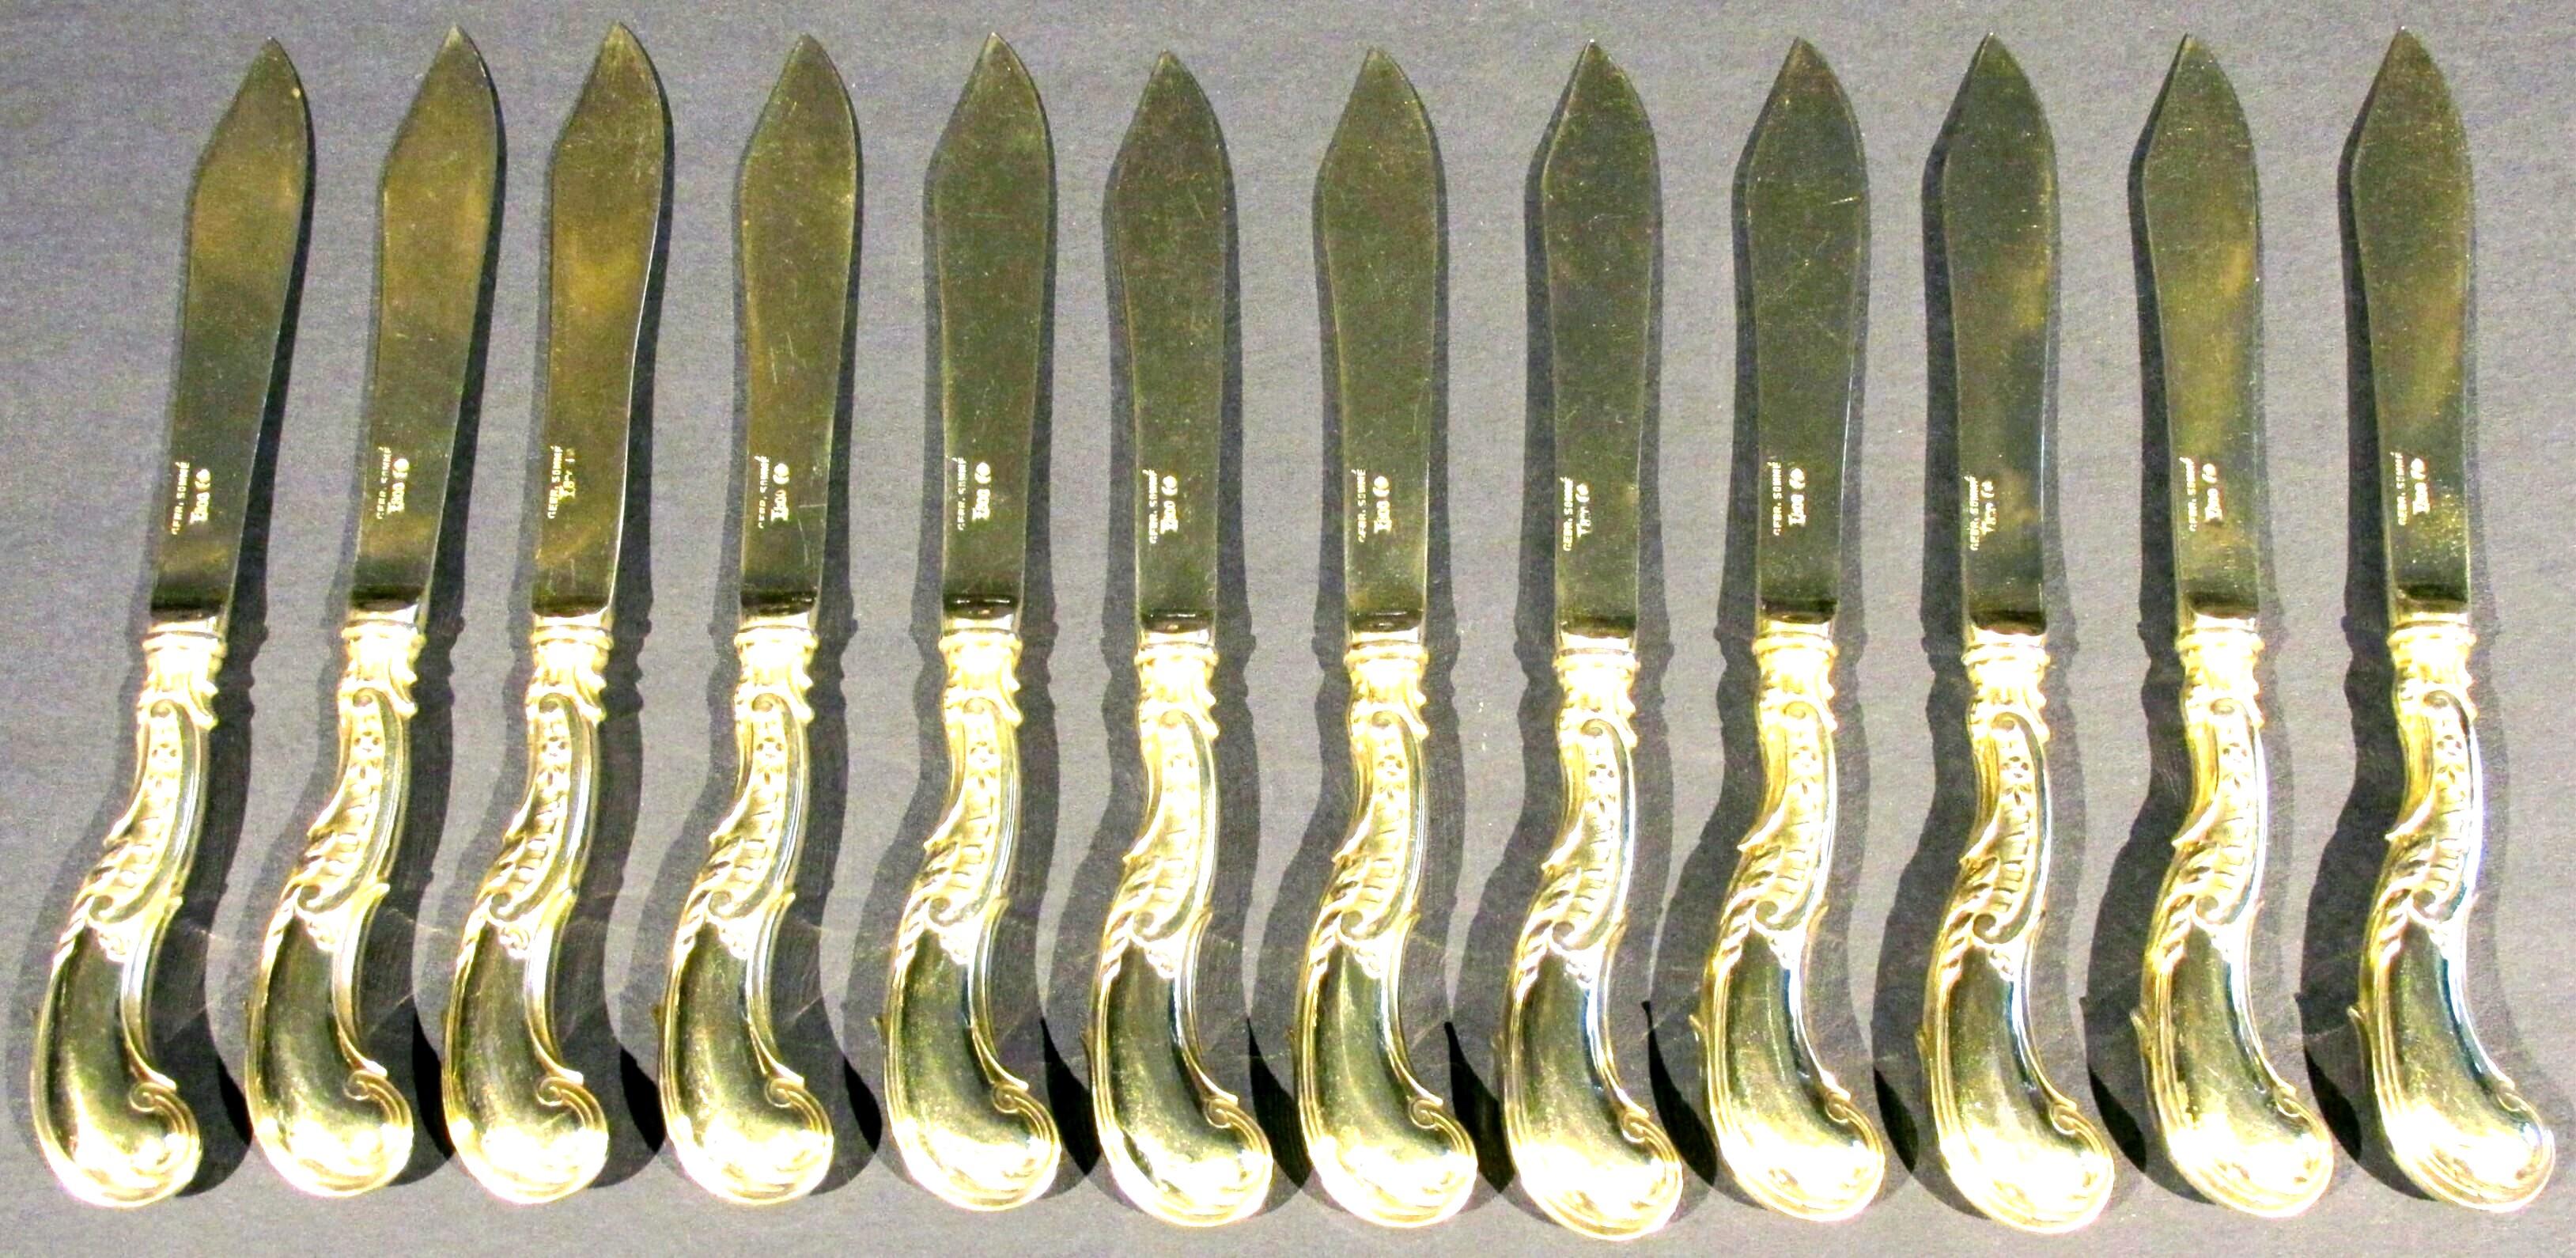 An exceptionally fine set of twelve Art Nouveau Period silver-gilt fish knives, all having richly cast and hand chased rocaille silver handles & blades with conforming scrolled and stippled detail, exhibiting a lustrous gilded surface overall. Each